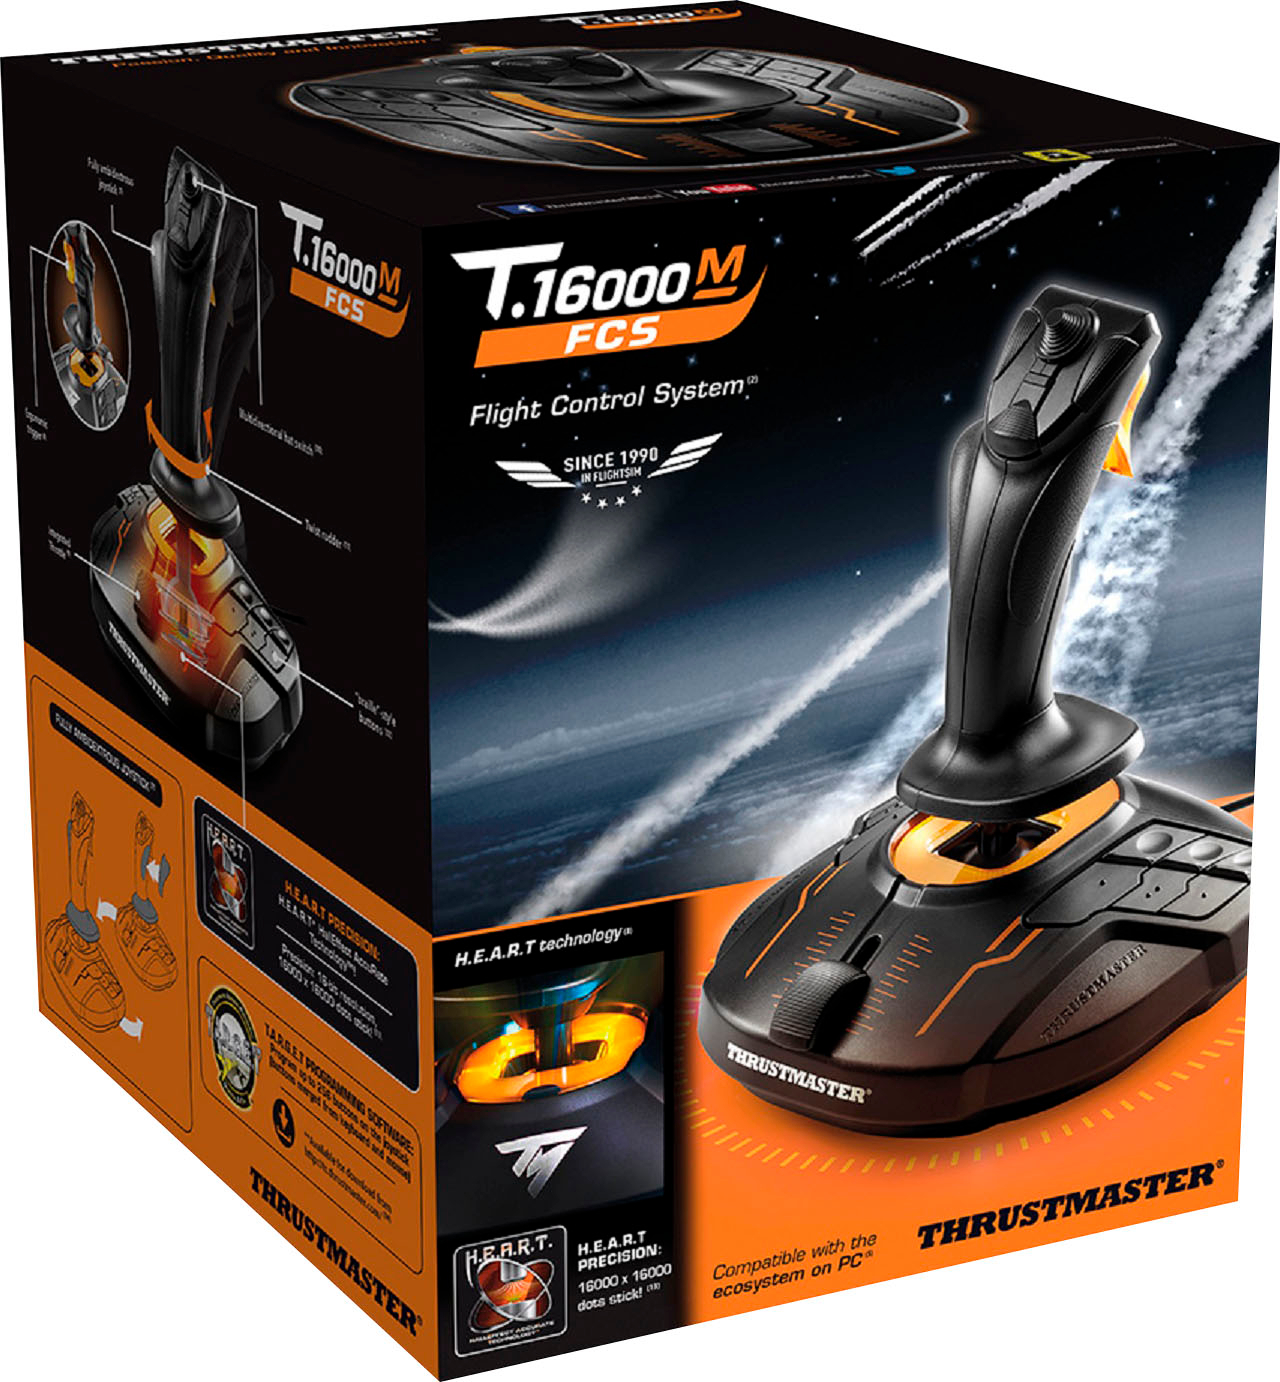 Thrustmaster T16000M Buy Black for HOTAS - Best FCS PC